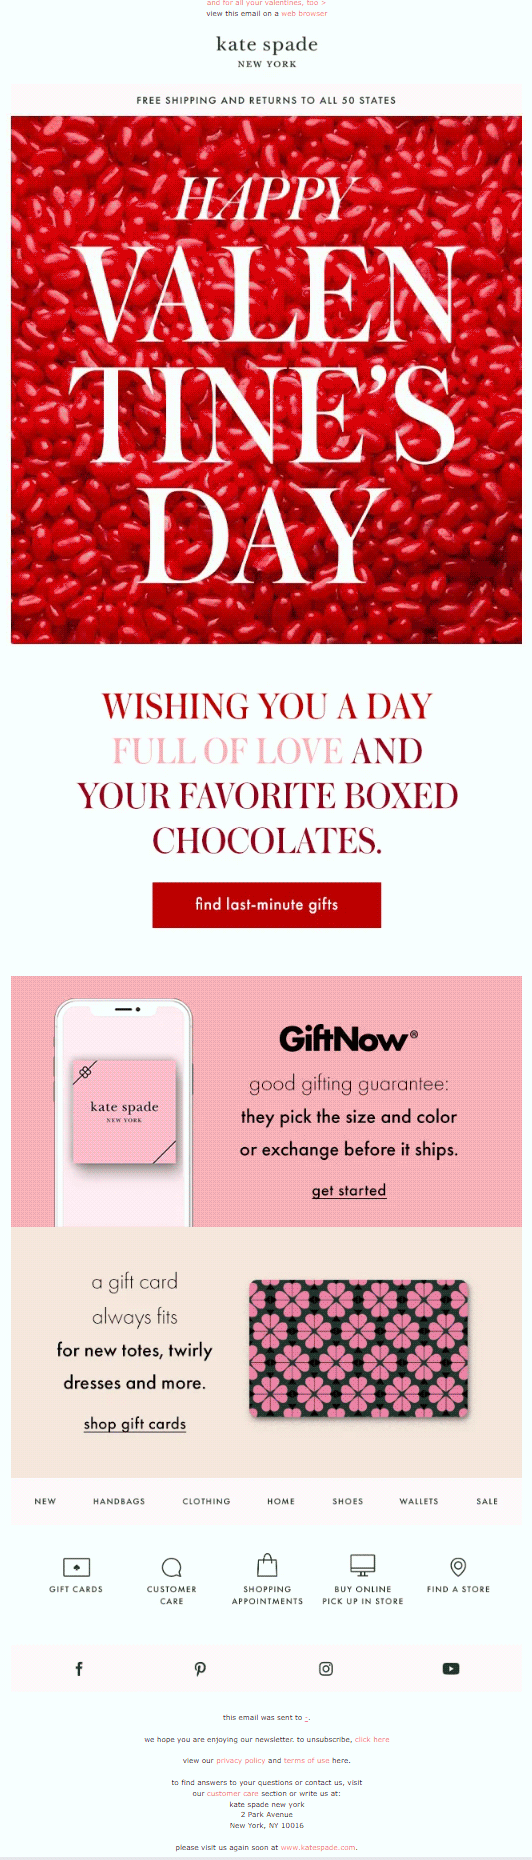 Kate Spade- Valentine's Day Email